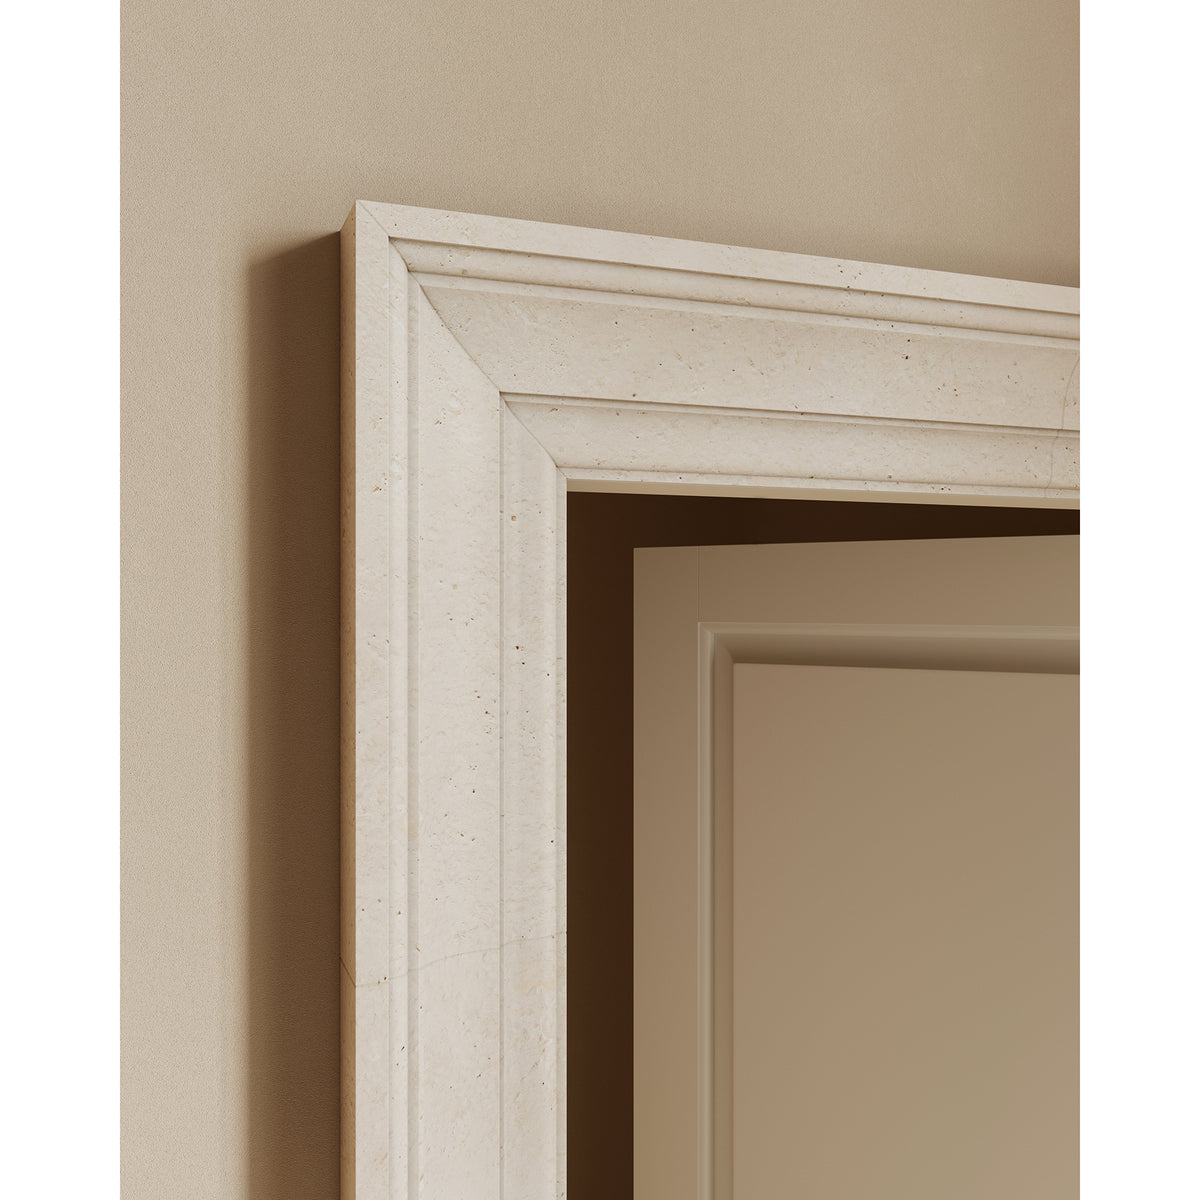 Heritage Door Surround shown in Modern Profile with Seville Travertine. Main Product Slider View